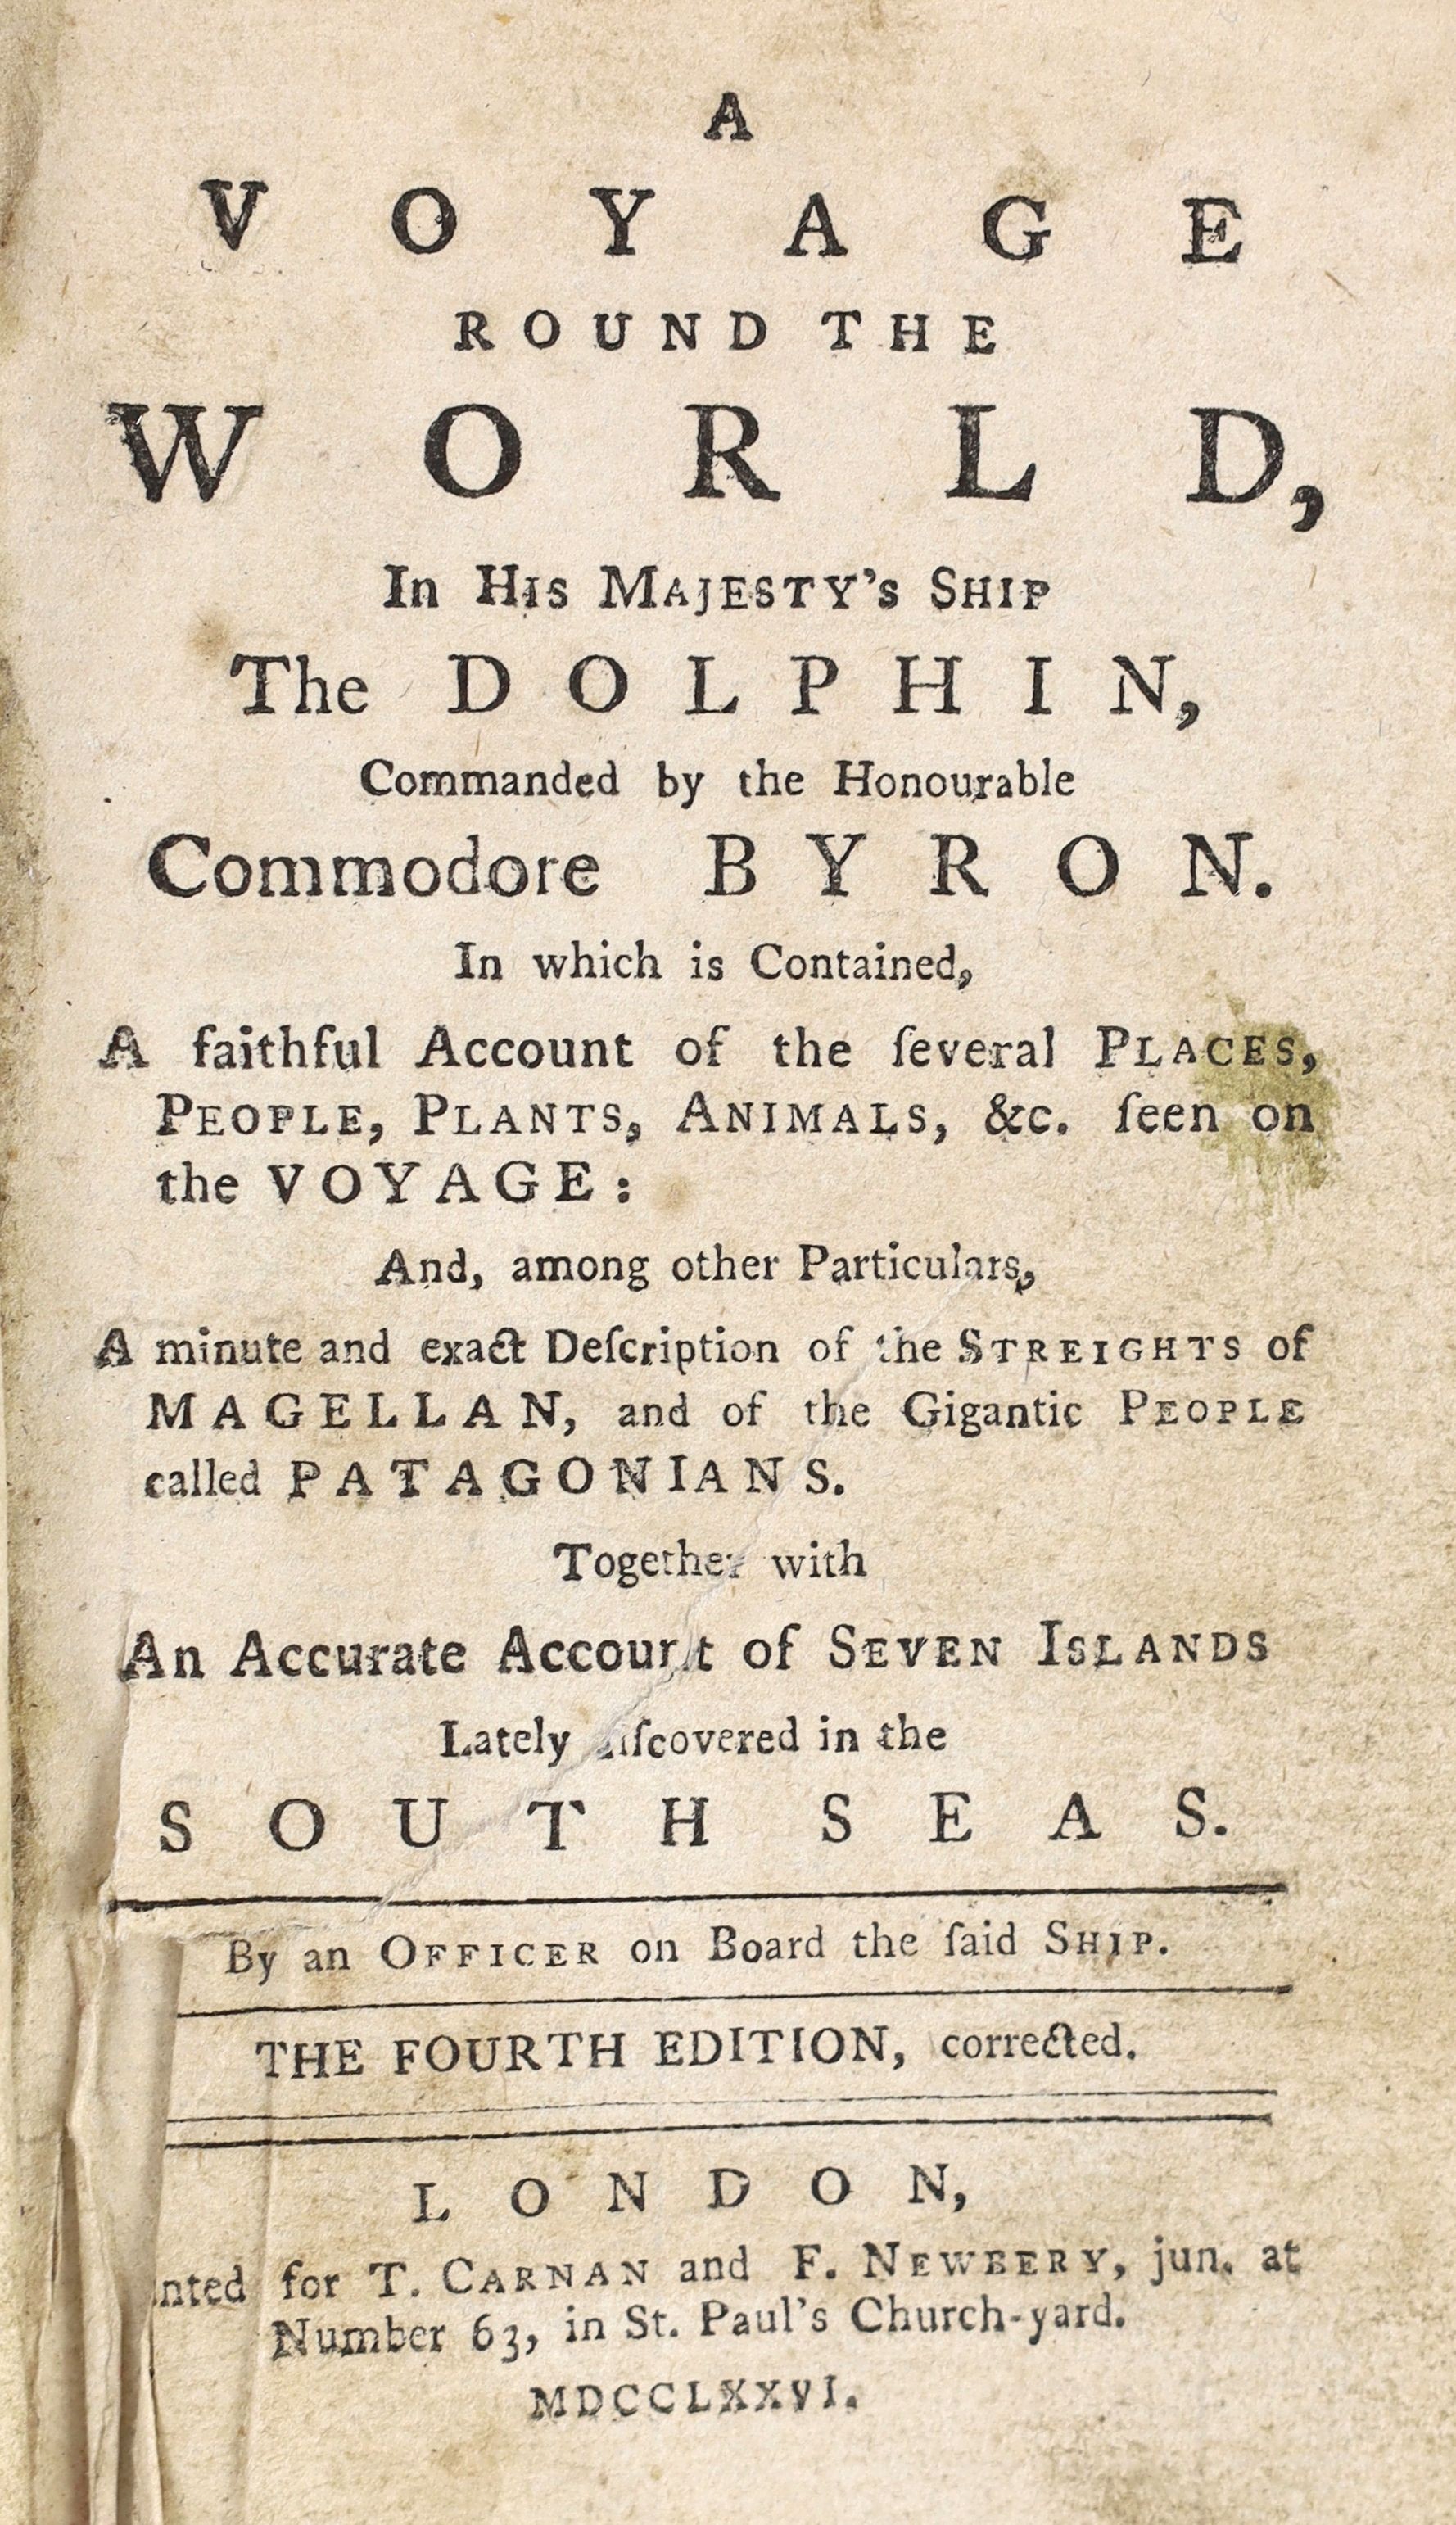 Byron, John (1723-1786); Clerke, Charles (attributed to) - A Voyage Round the World, in His Majesty’s Ship The Dolphin, Commanded by the Honourable Commodore Byron, 4th edition, 12mo, original calf, with engraved frontis